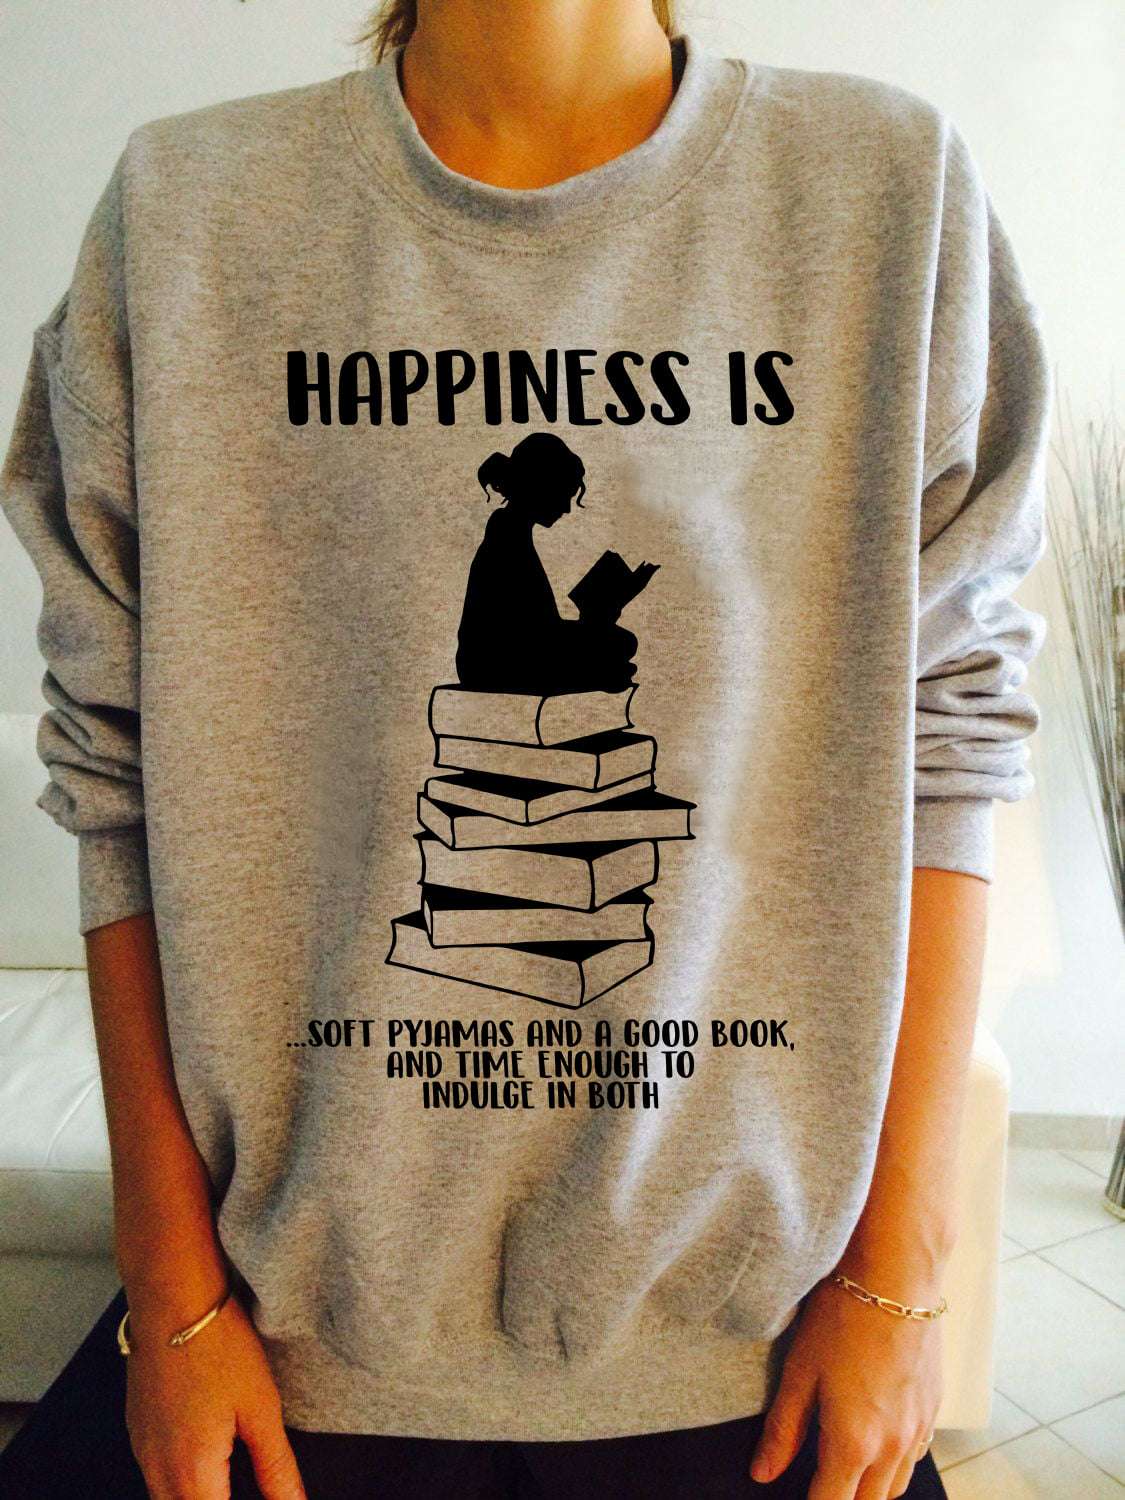 Happiness is soft pyjama and a good book and time enough to indulge in both - Girls bookaholic